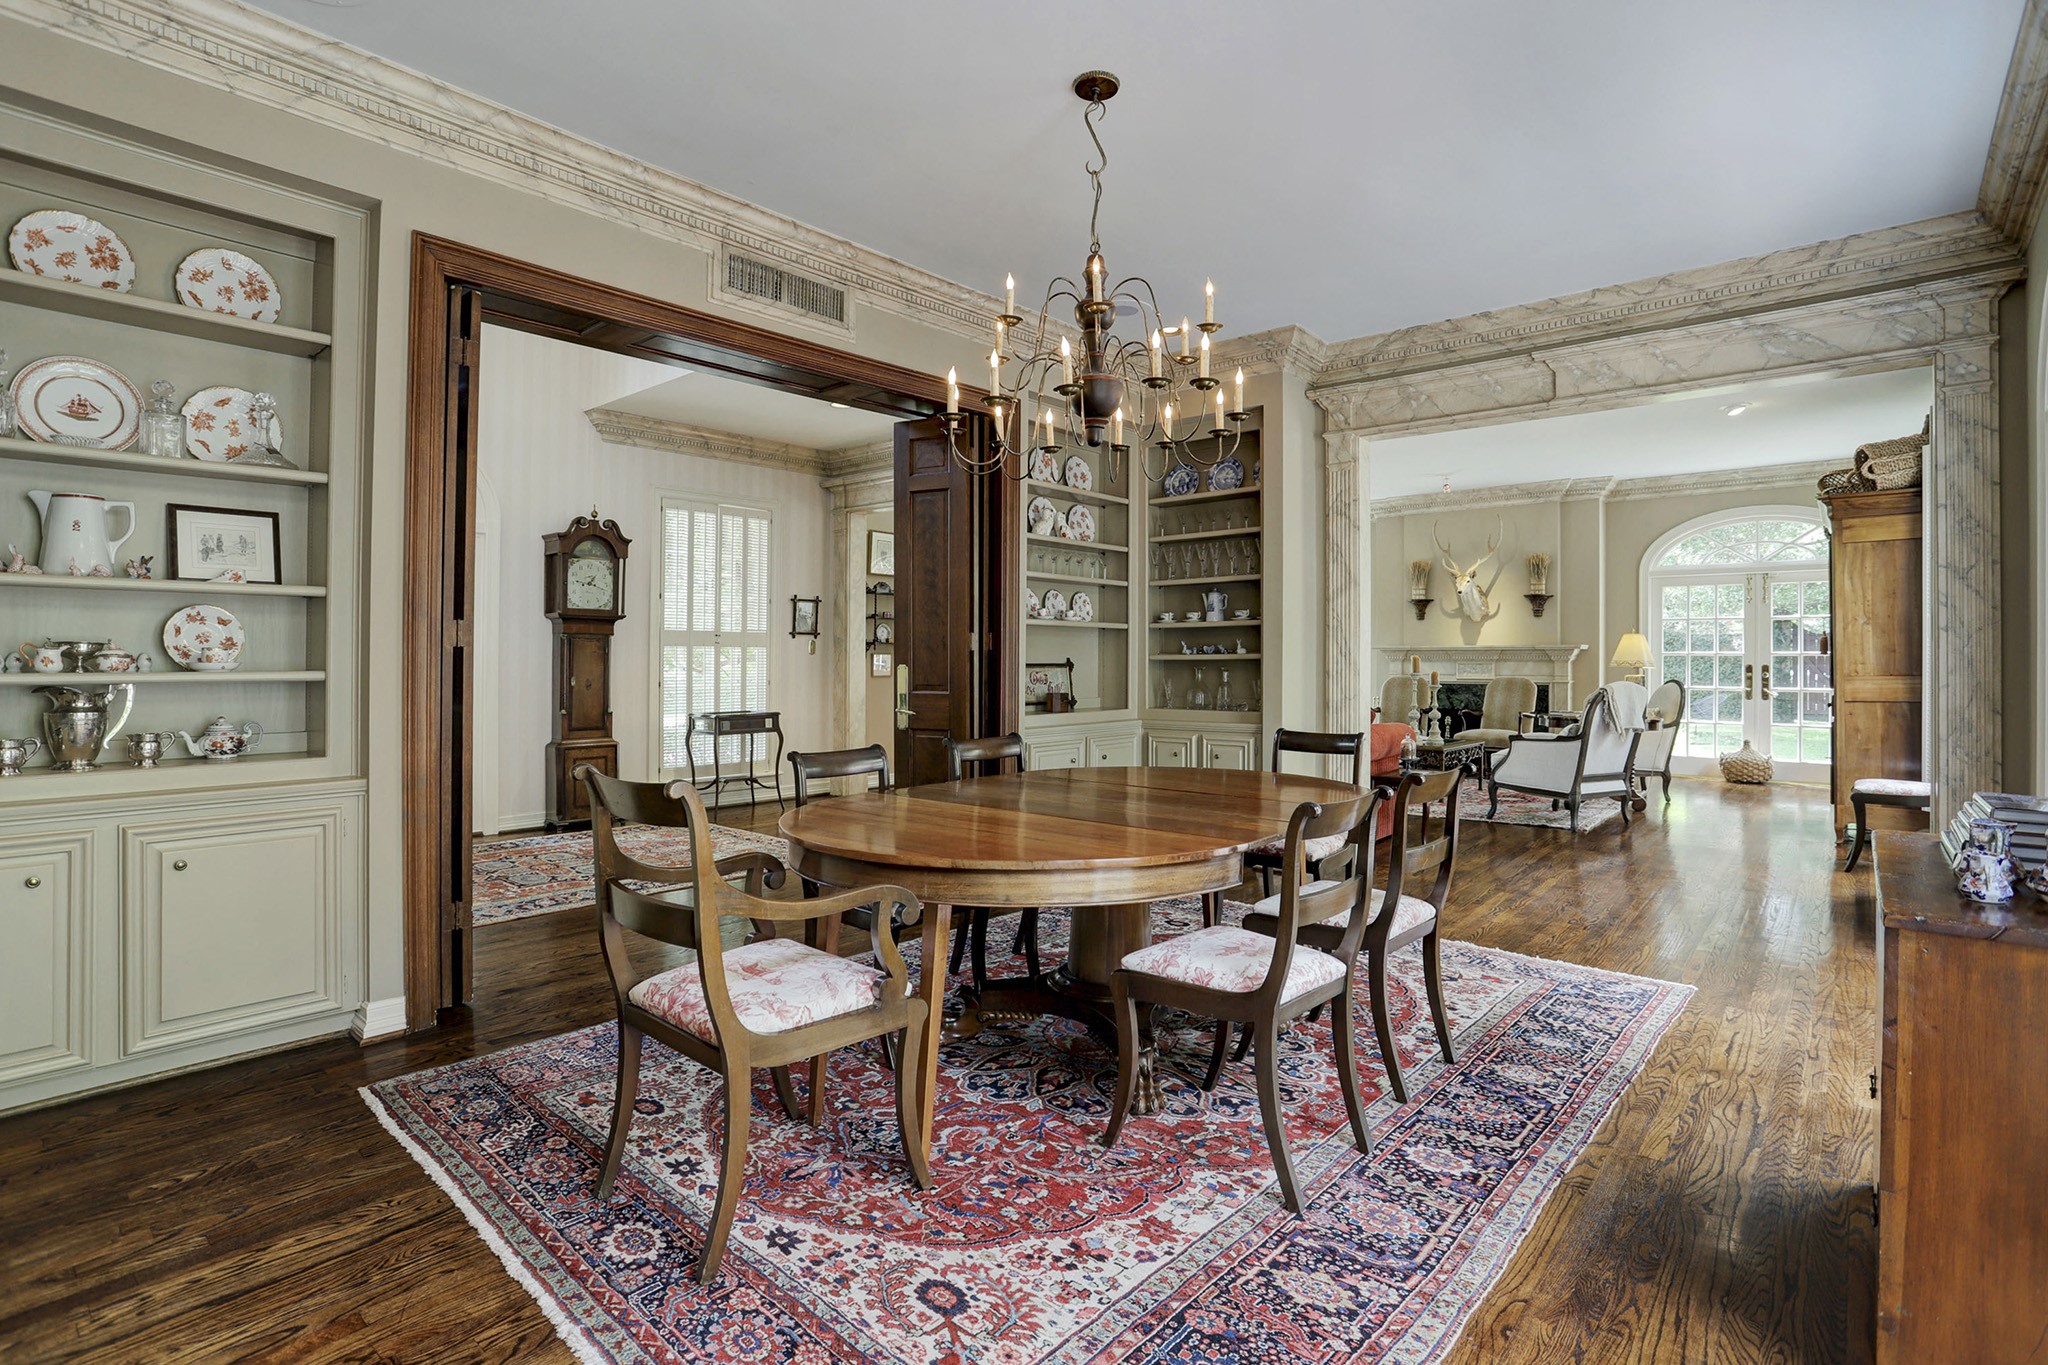 Perfect for small or larger gatherings, the dining room has built-in shelves and cabinets, hardwood floors and French doors that open to the inviting brick patio and outdoor kitchen.